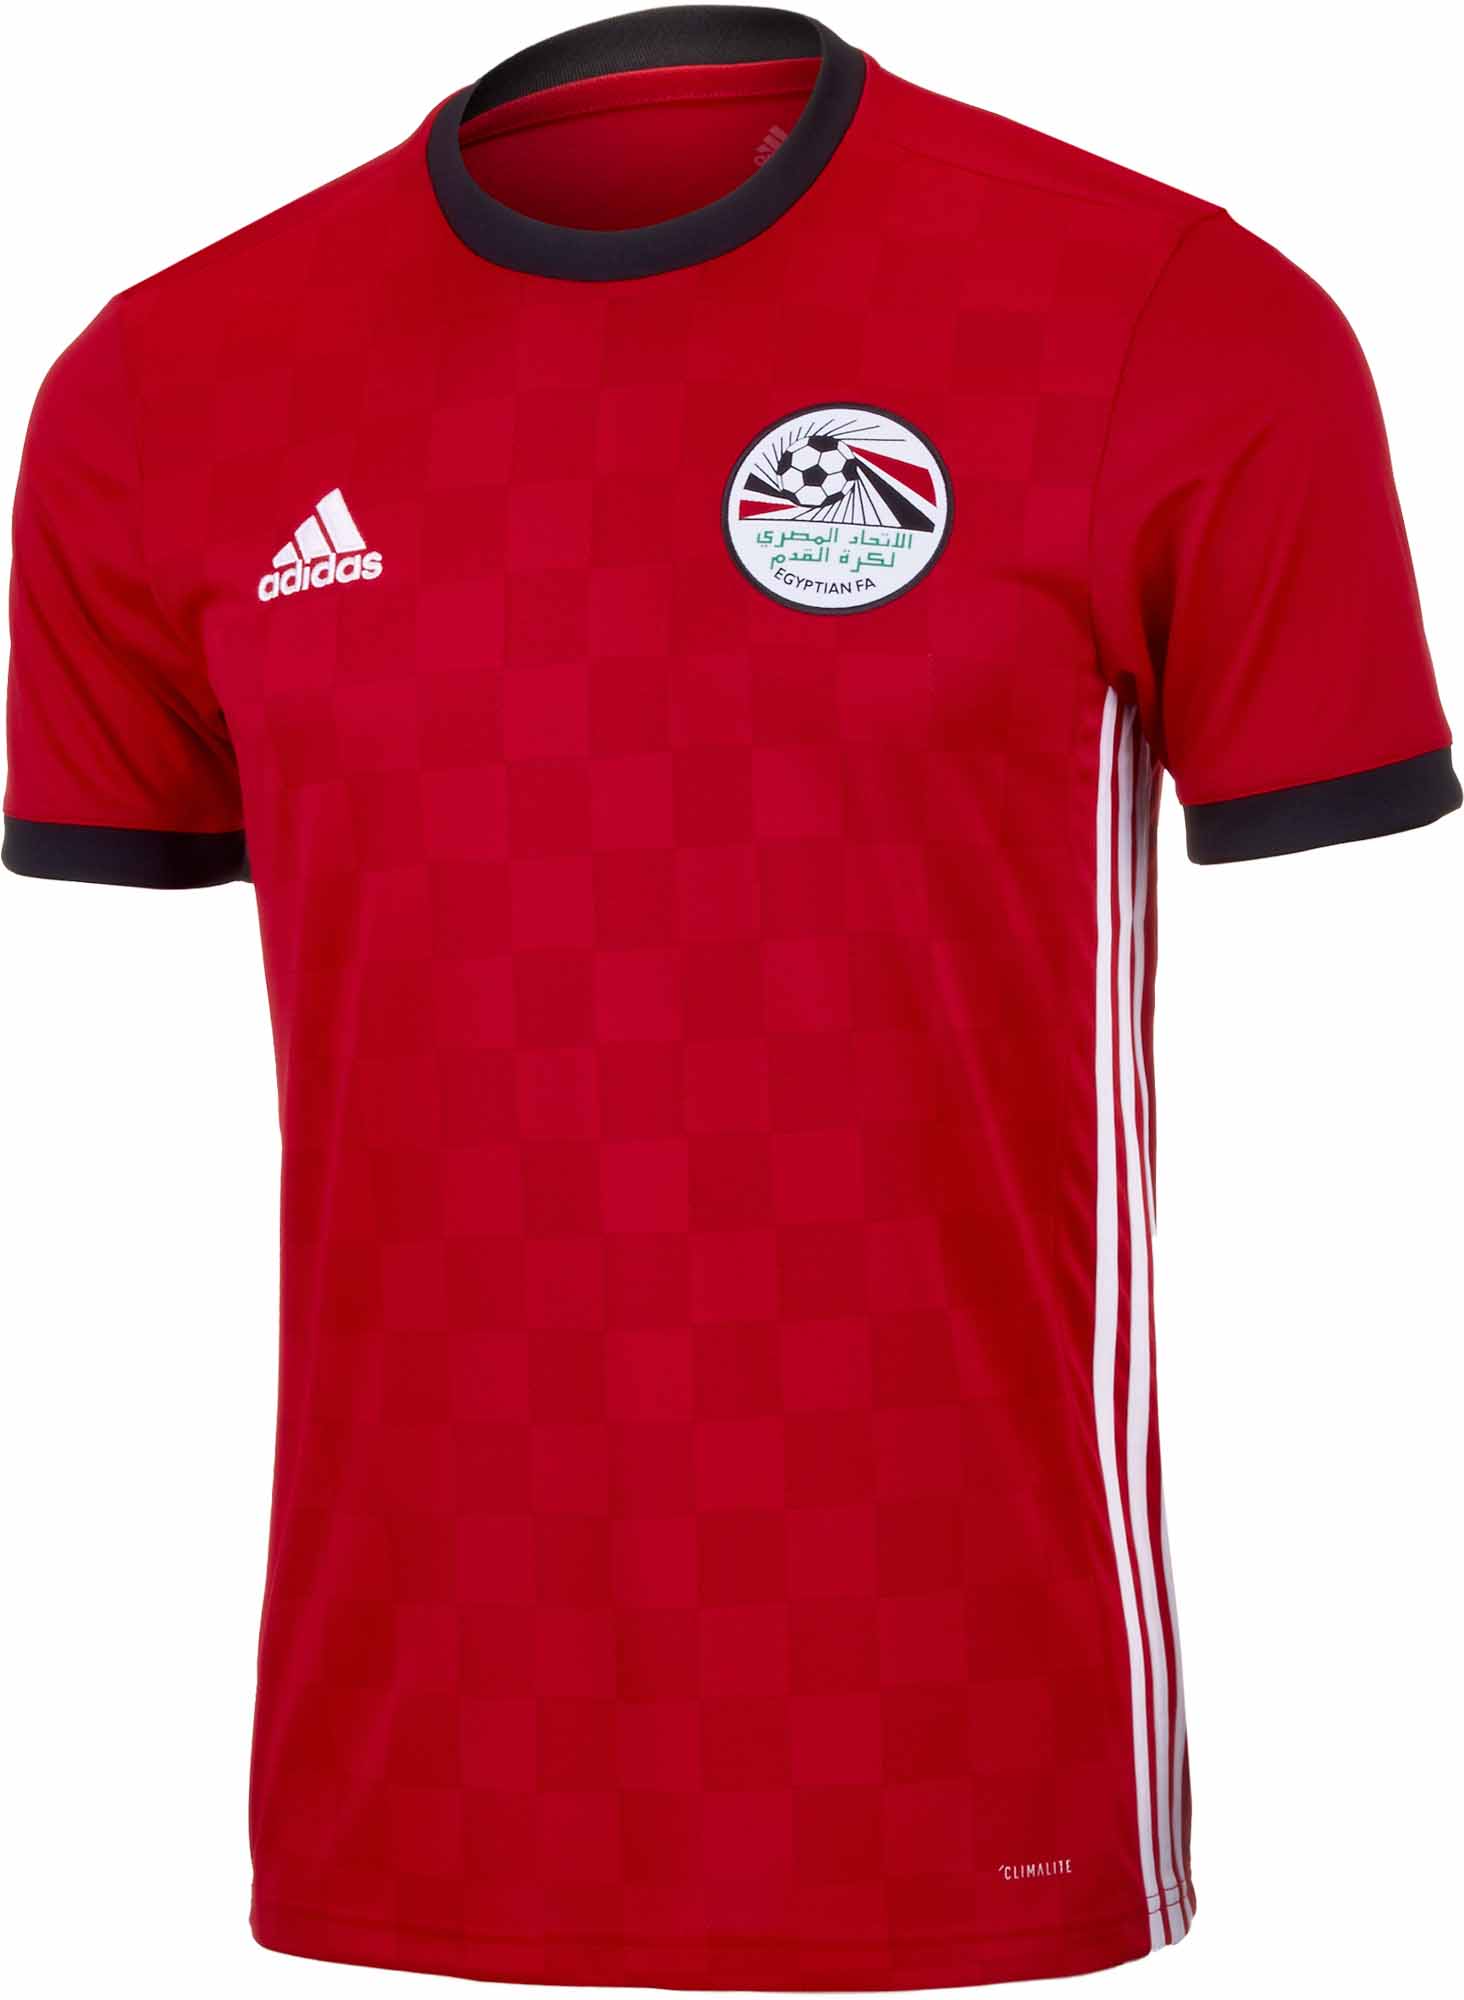 2018/19 adidas Home Jersey - Soccer